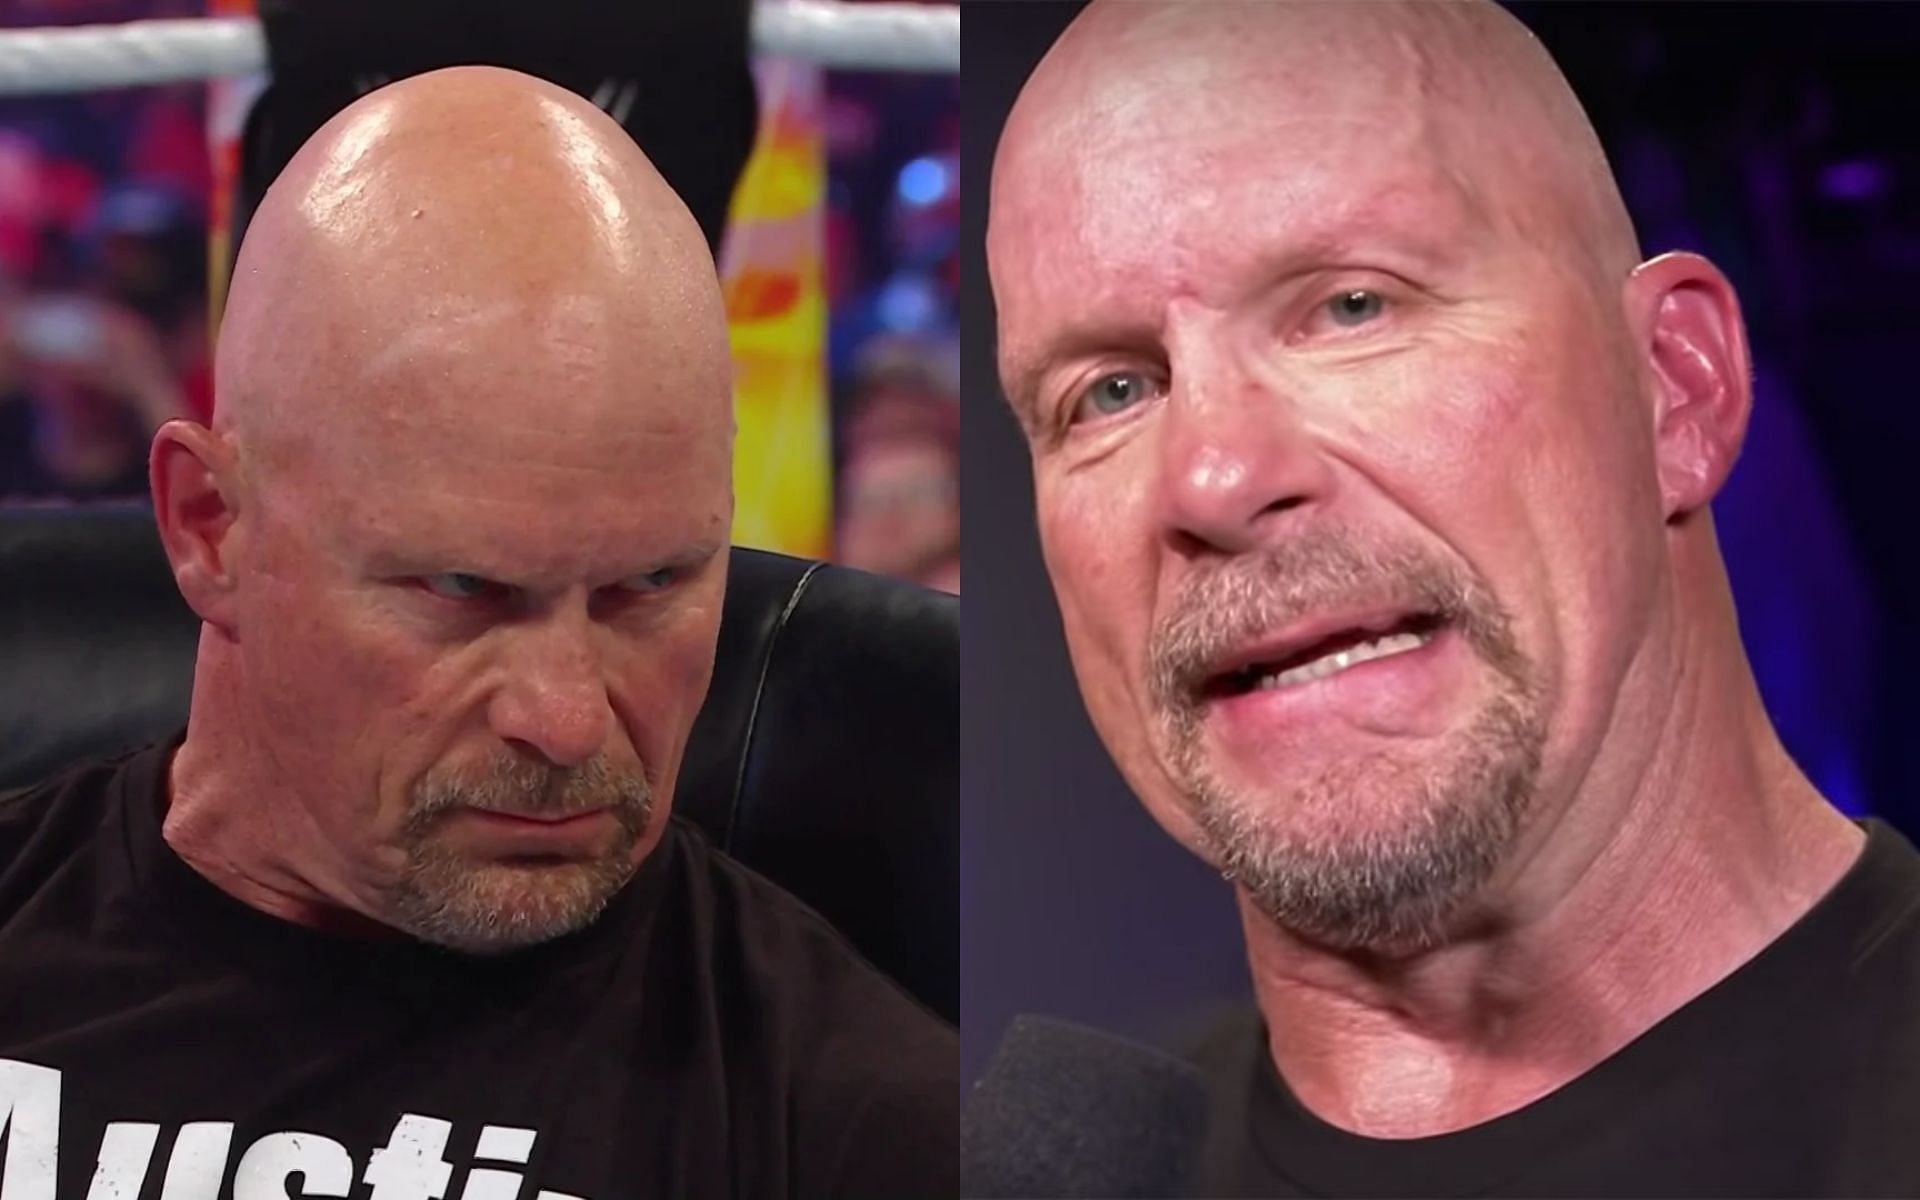 Stone Cold Steve Austin will be playing host to an injured star